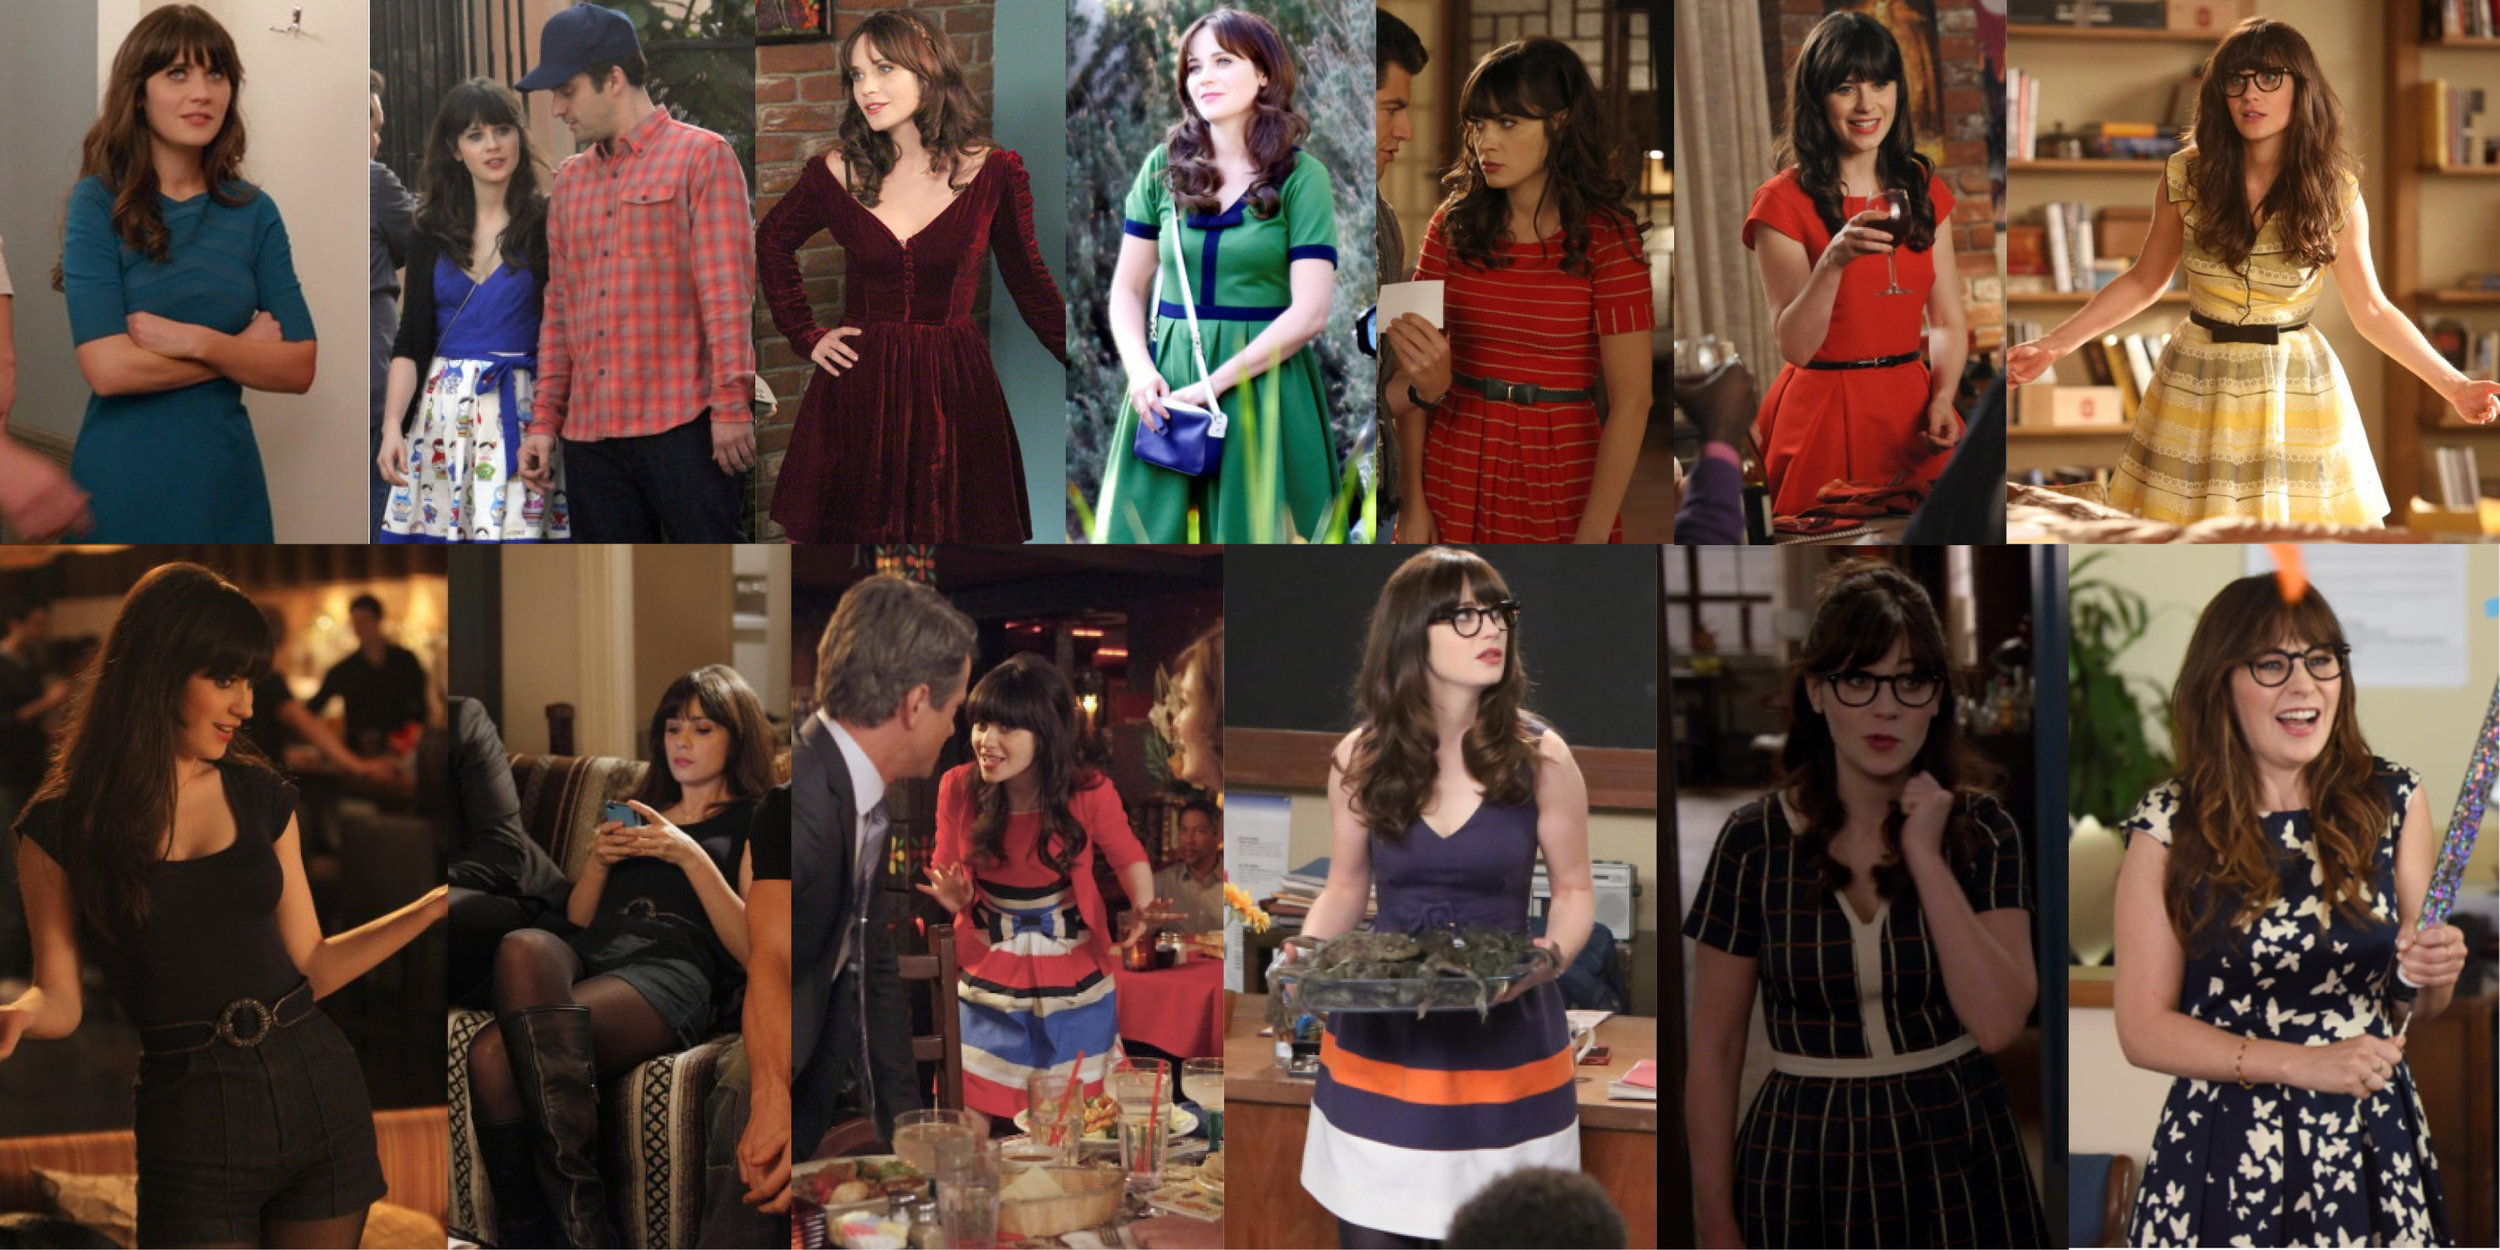 new girl jess outfits